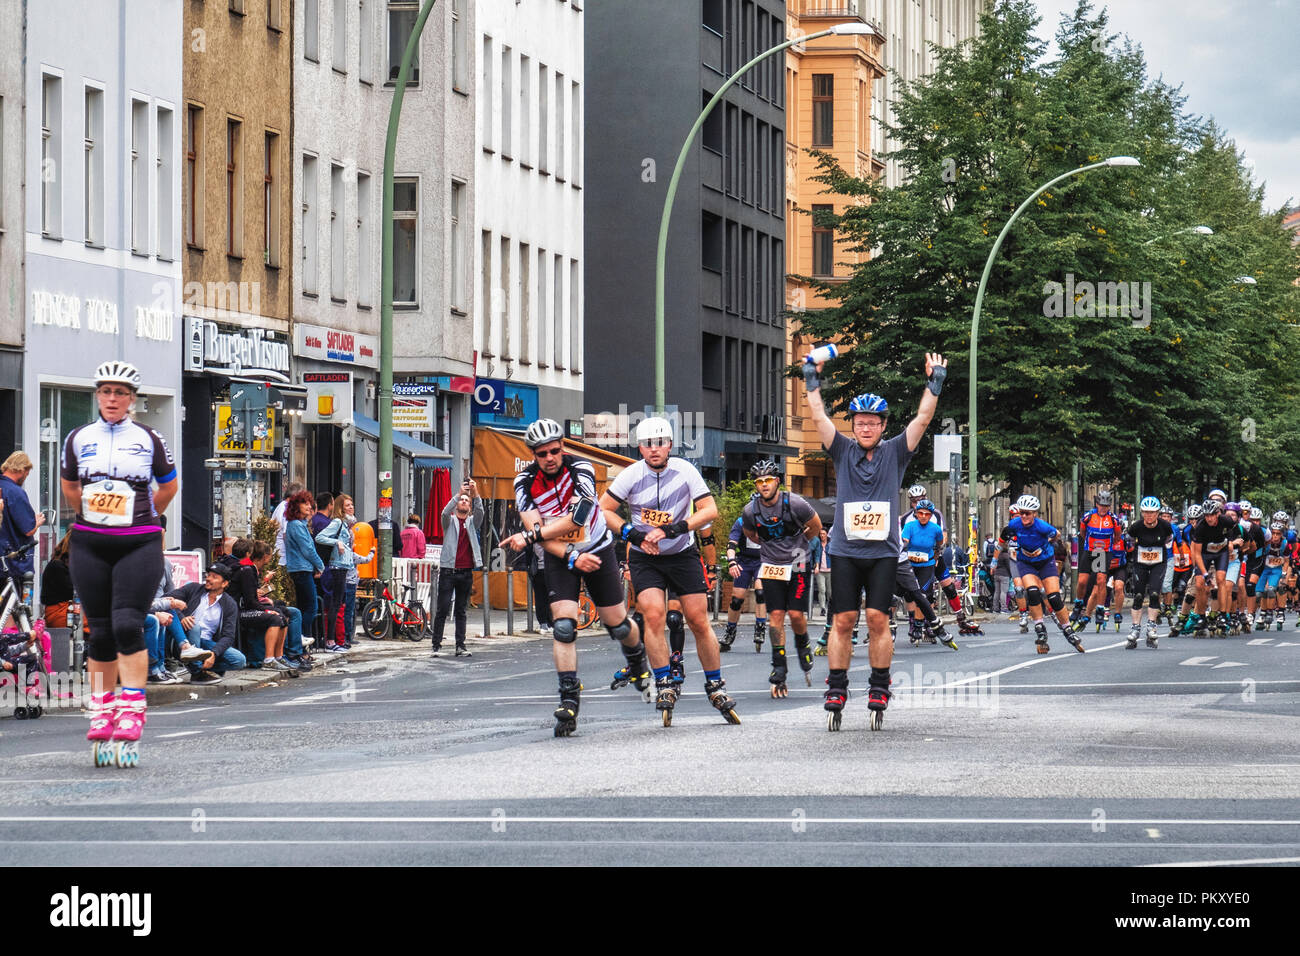 Berlin Germany, 15 September 2018. Annual Inline Skating Marathon. In line skaters pass through Rosenthaler Platz as they compete in the annual roller skating event. The event is the Grand Finale of the Inline skating season as skaters participants from 60 countries compete for the WORLD and GERMAN INLINE CUP Credit: Eden Breitz/Alamy Live News Stock Photo